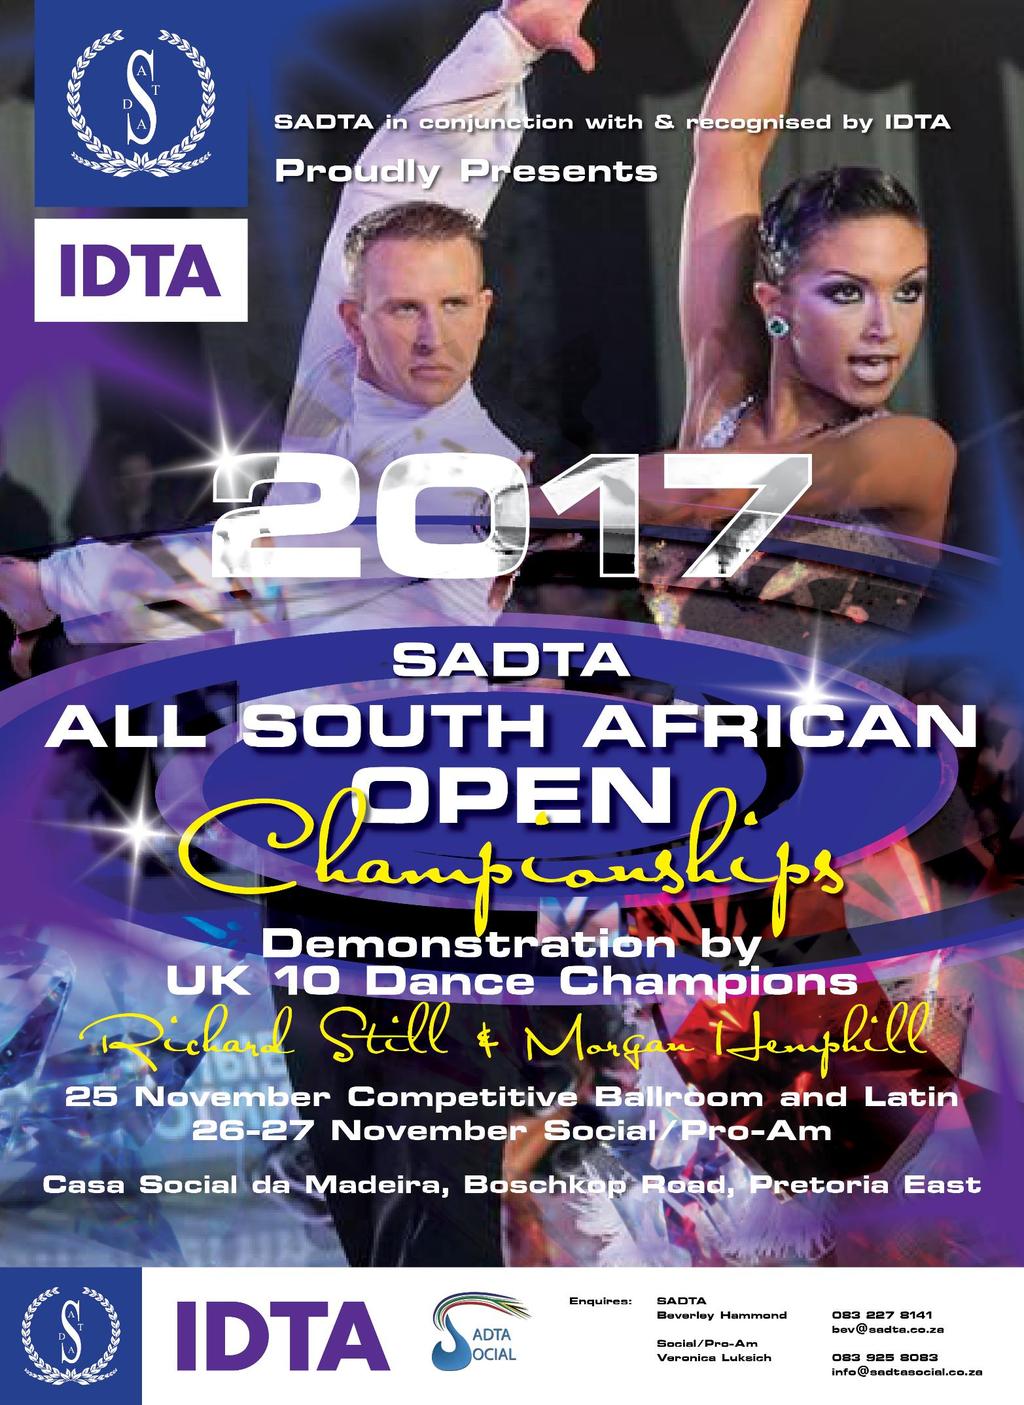 2017 SADTA ALL SOUTH AFRICAN OPEN DANCE CHAMPIONSHIPS